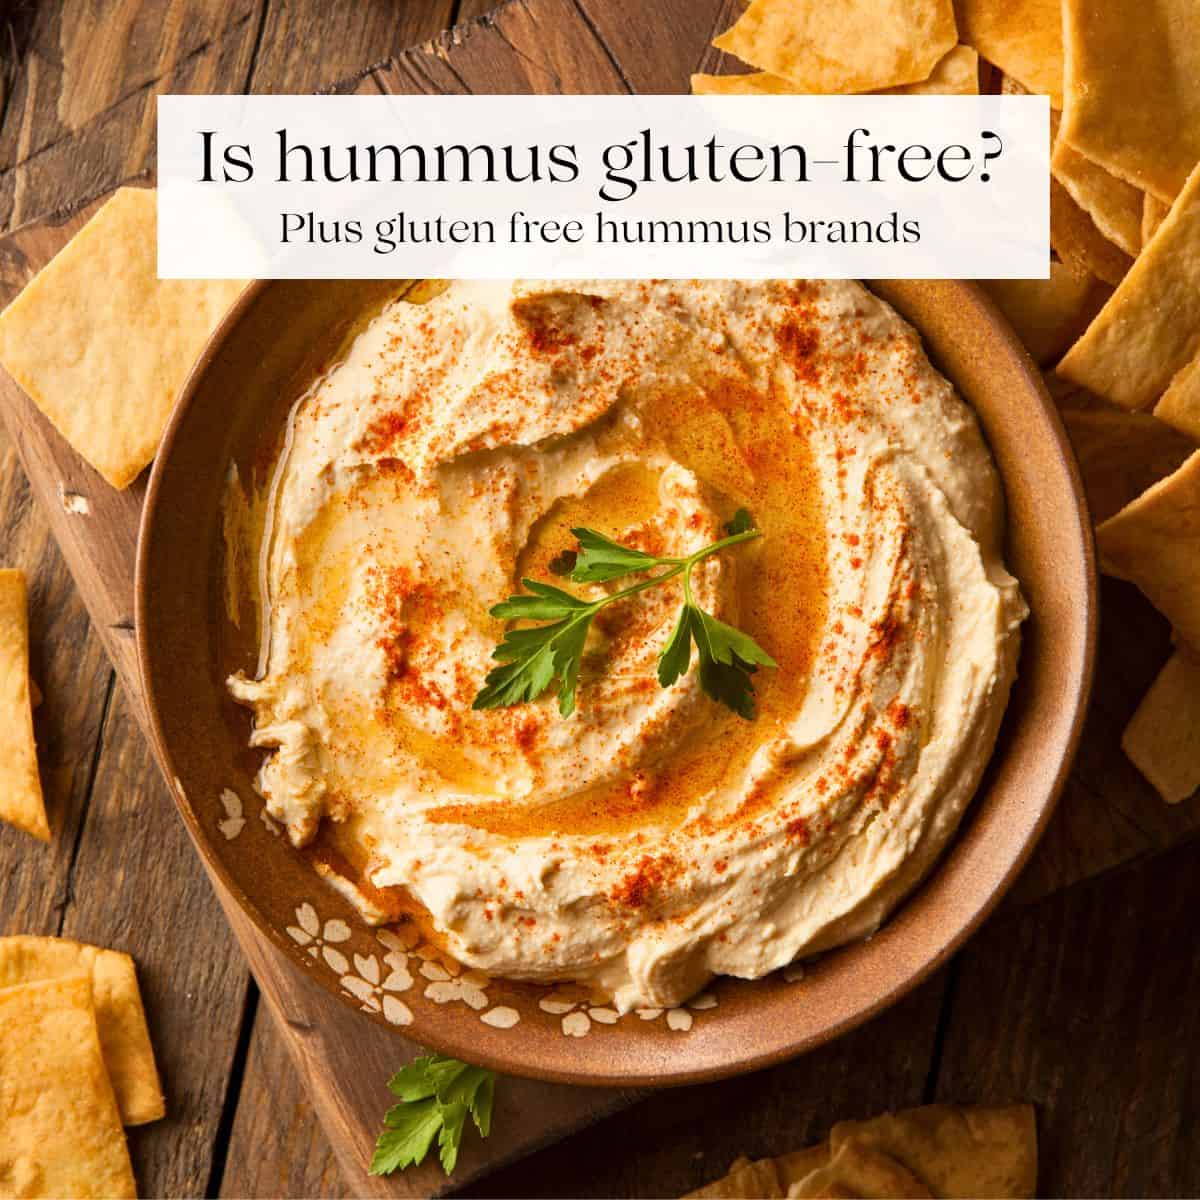 A bowl of hummus garnished with fresh parsley with pita chips around it.